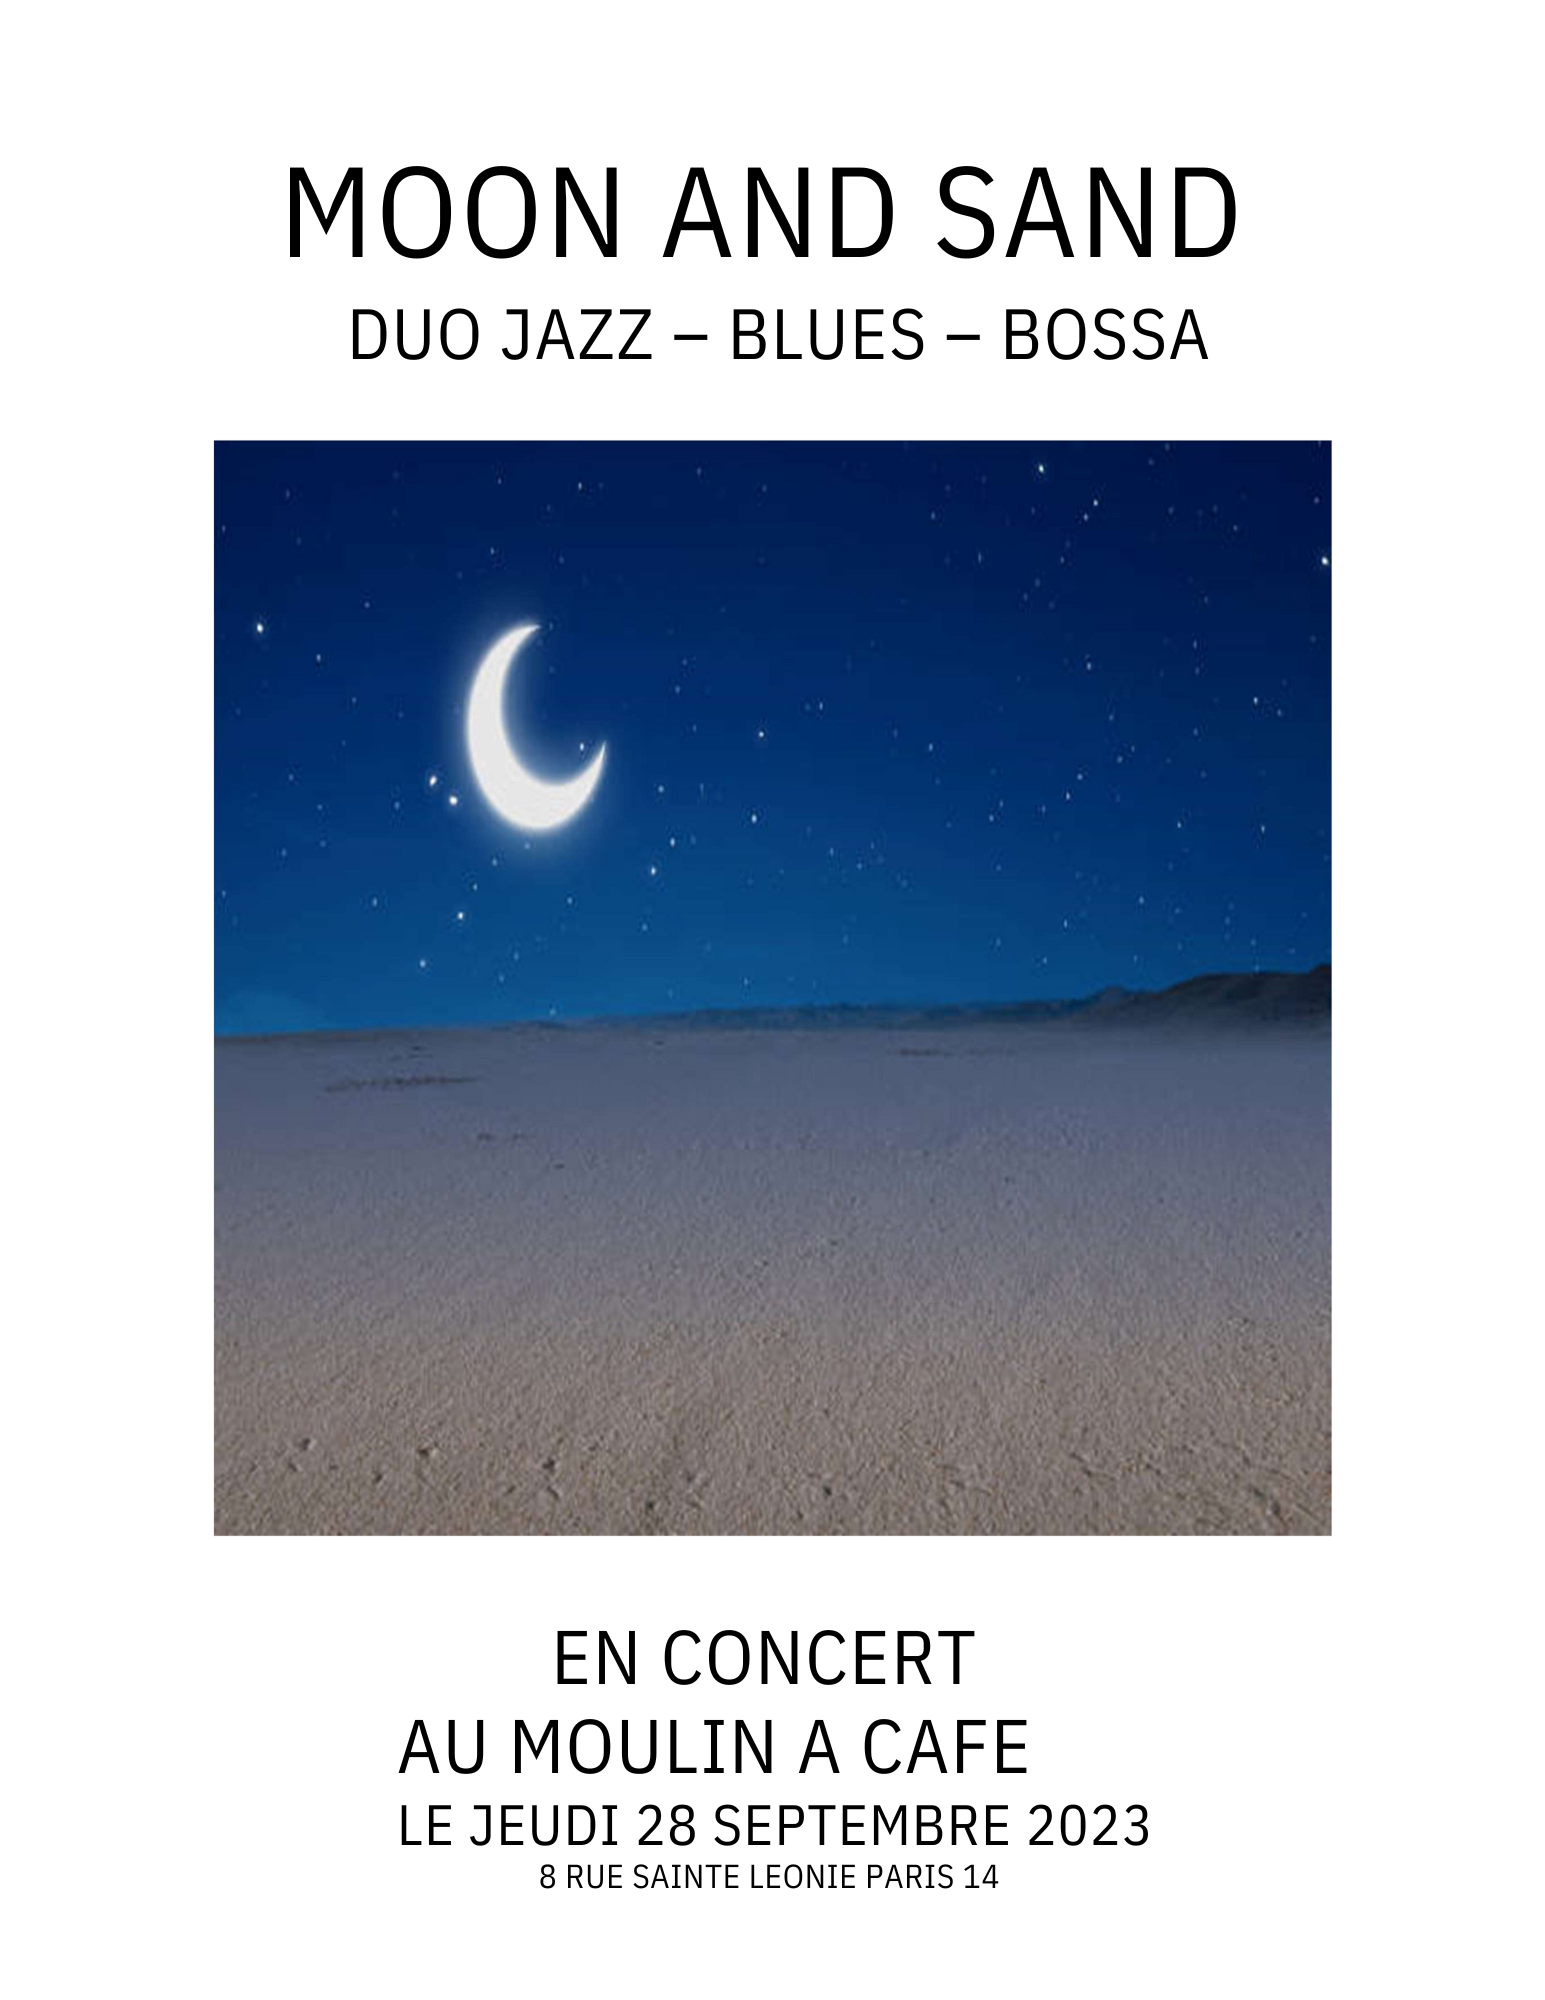 Concert : Moon and sand